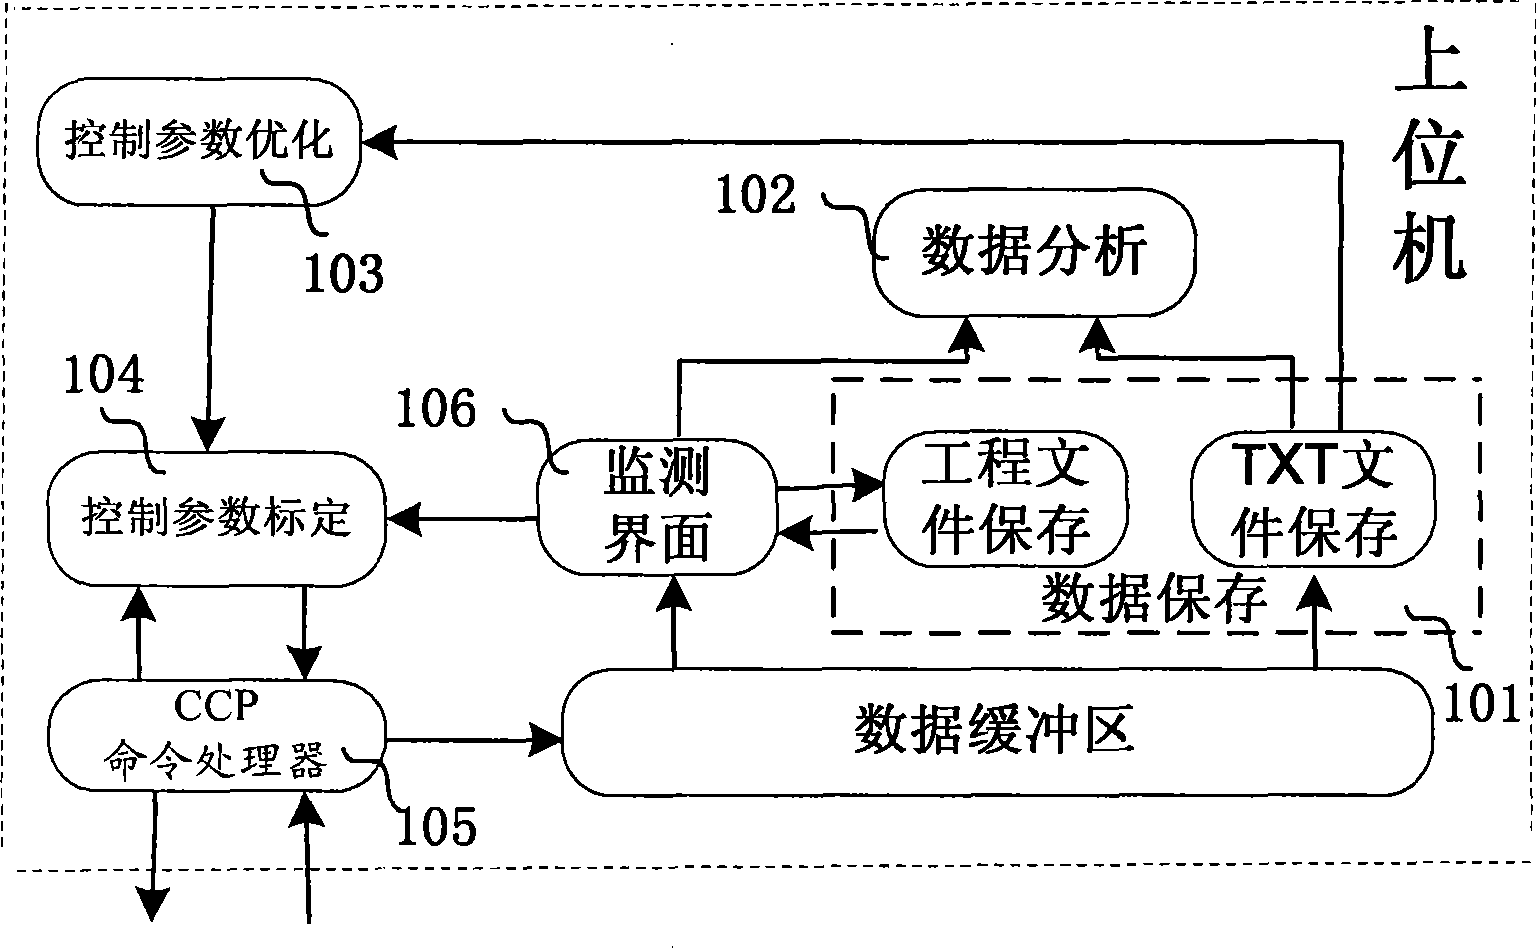 Automobile ABS ECU on-line calibration system and method based on CCP protocol